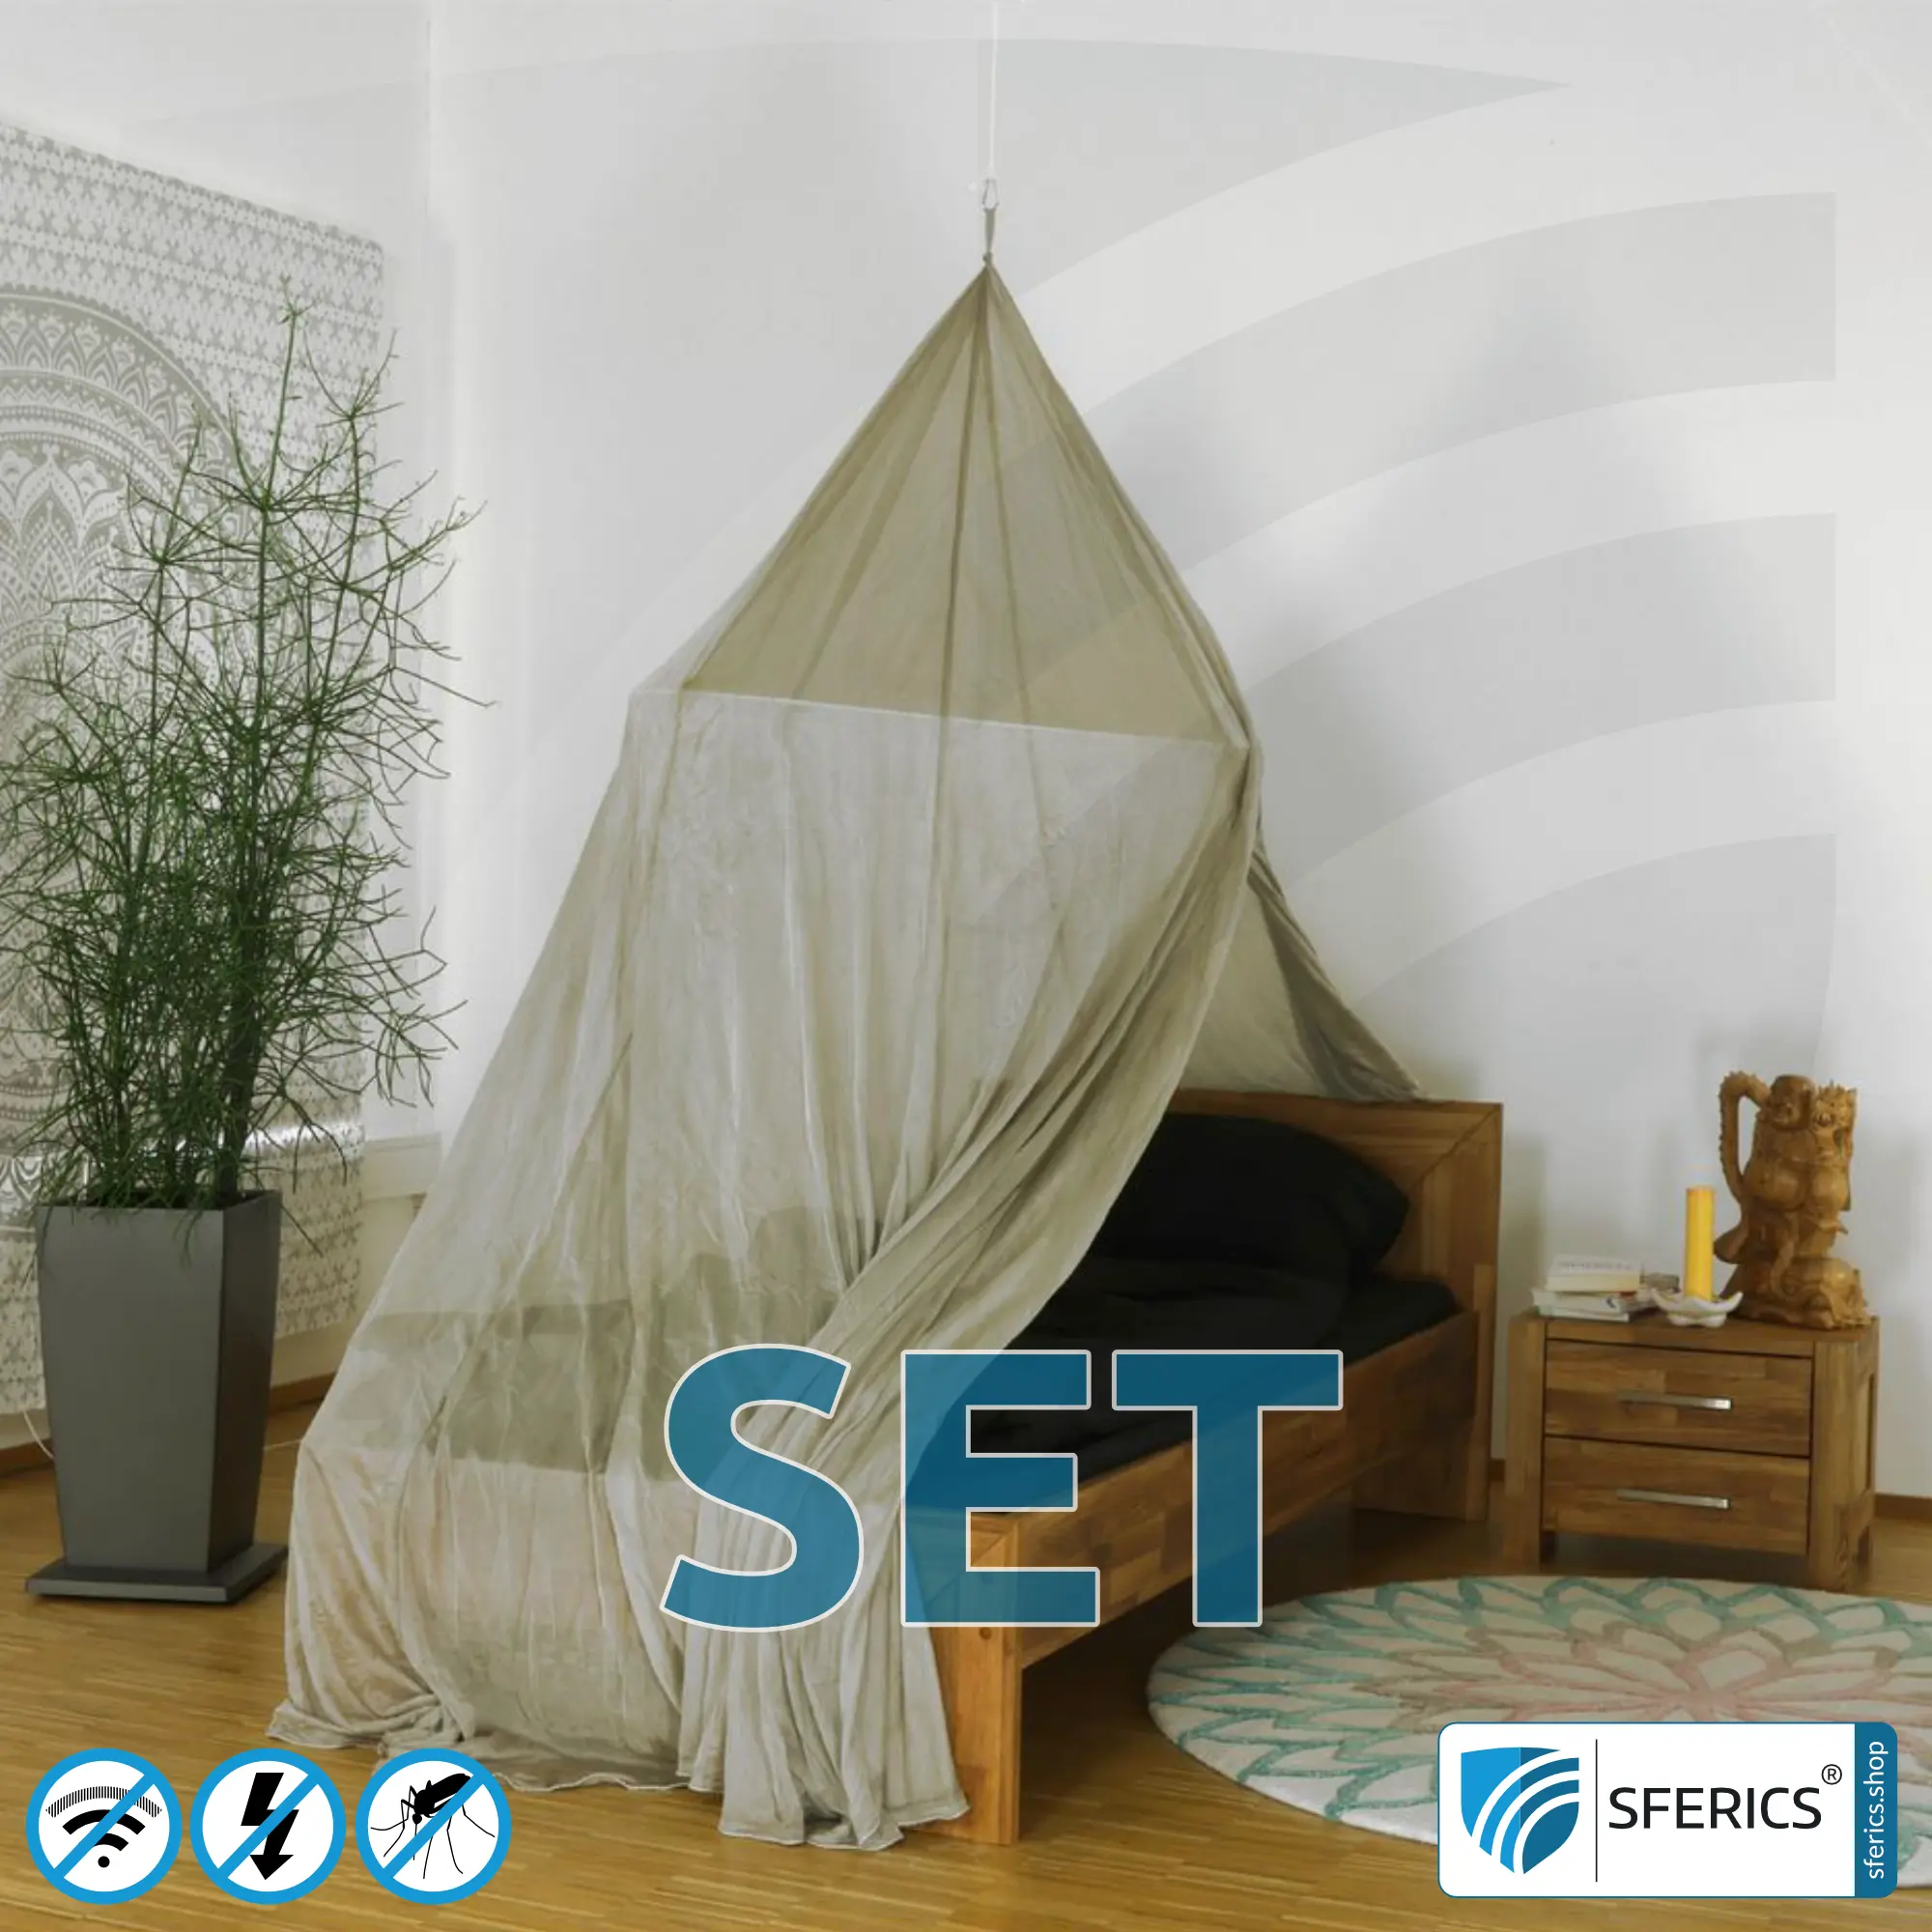 Shielding canopy Electrosmog PRO in a set | SINGLE BED PYRAMID | Shielding RF radiation over 99.99% (48 dB). Groundable. Effective against 5G!